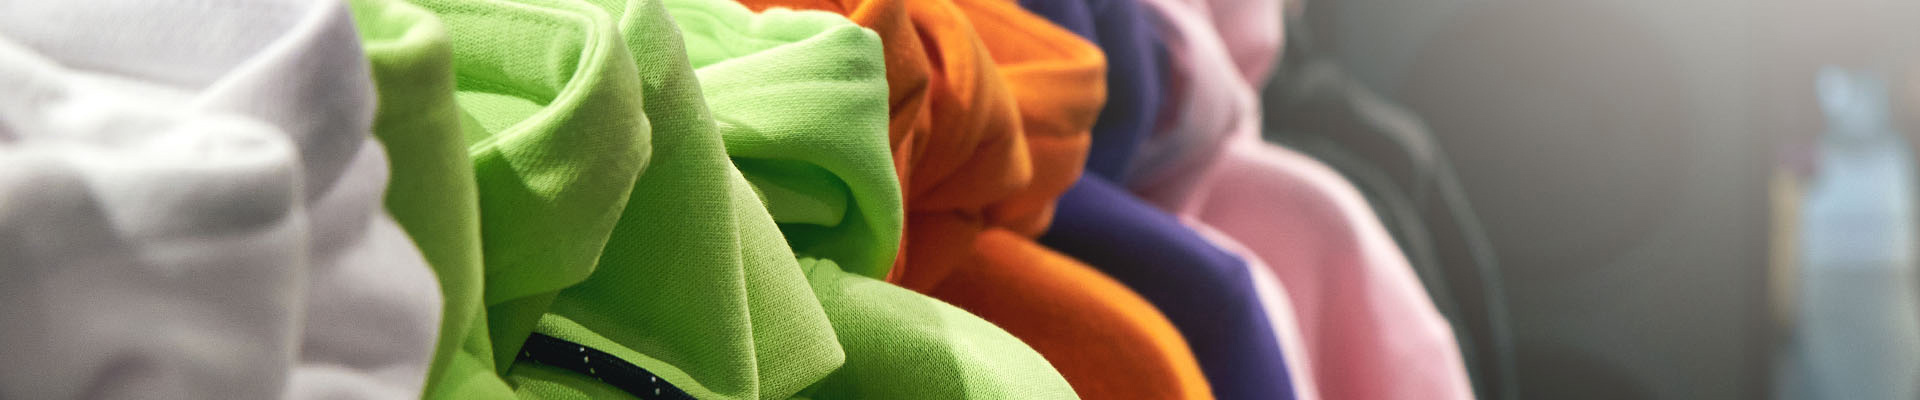 How to Optimize a Traditional Textile Workflow with Digital Color Solutions  | X-Rite Whitepaper